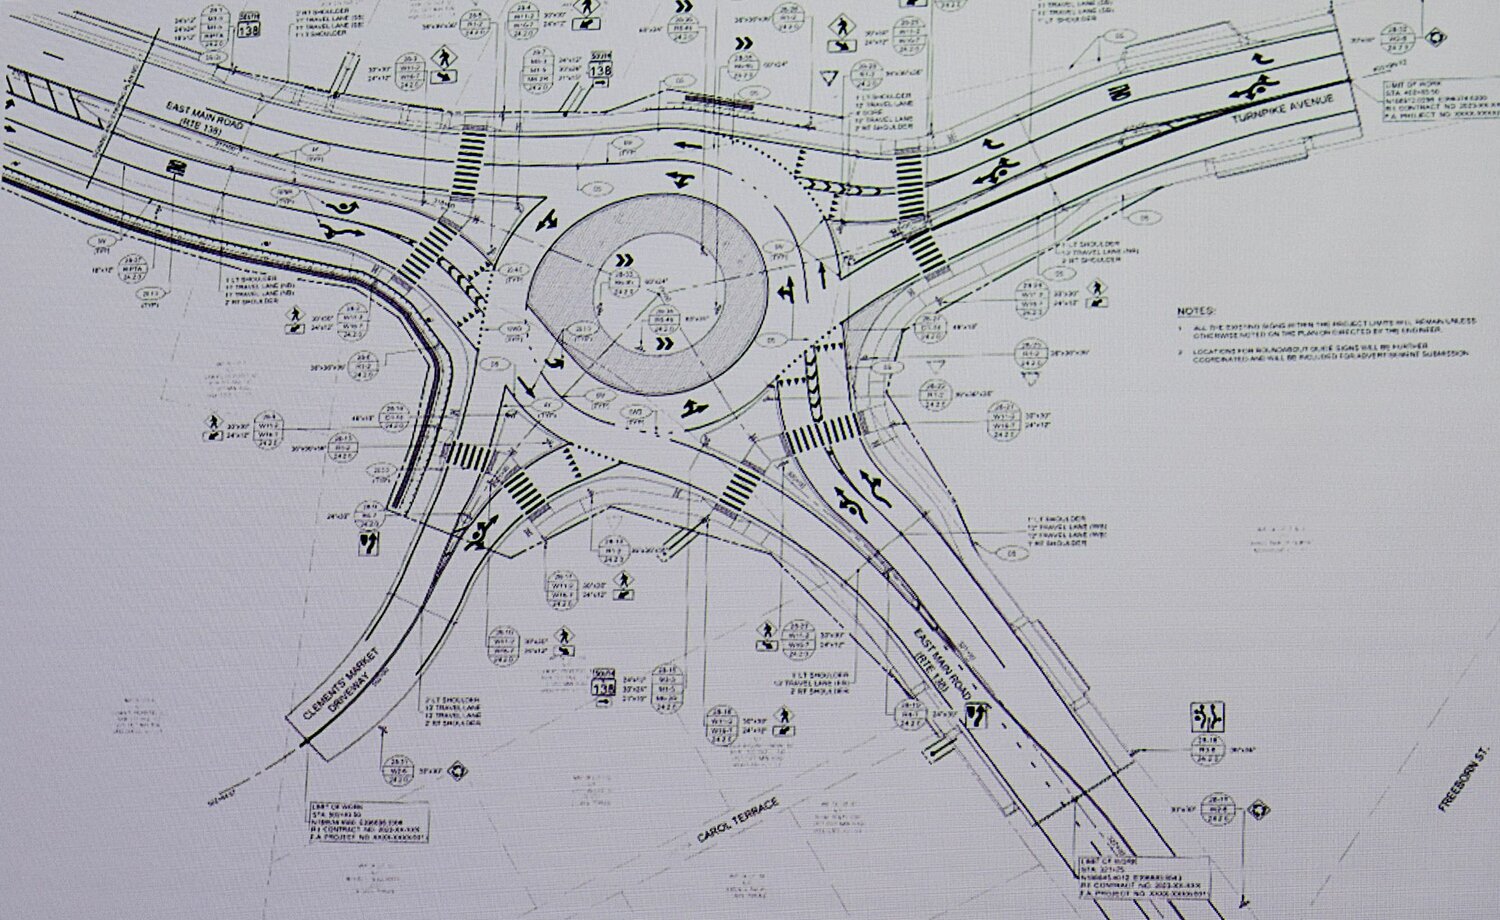 This RIDOT schematic, showing the layout of a roundabout proposed for East Main Road at Turnpike Avenue, was displayed at Thursday’s meeting. It was unclear how recent this illustration is, however.